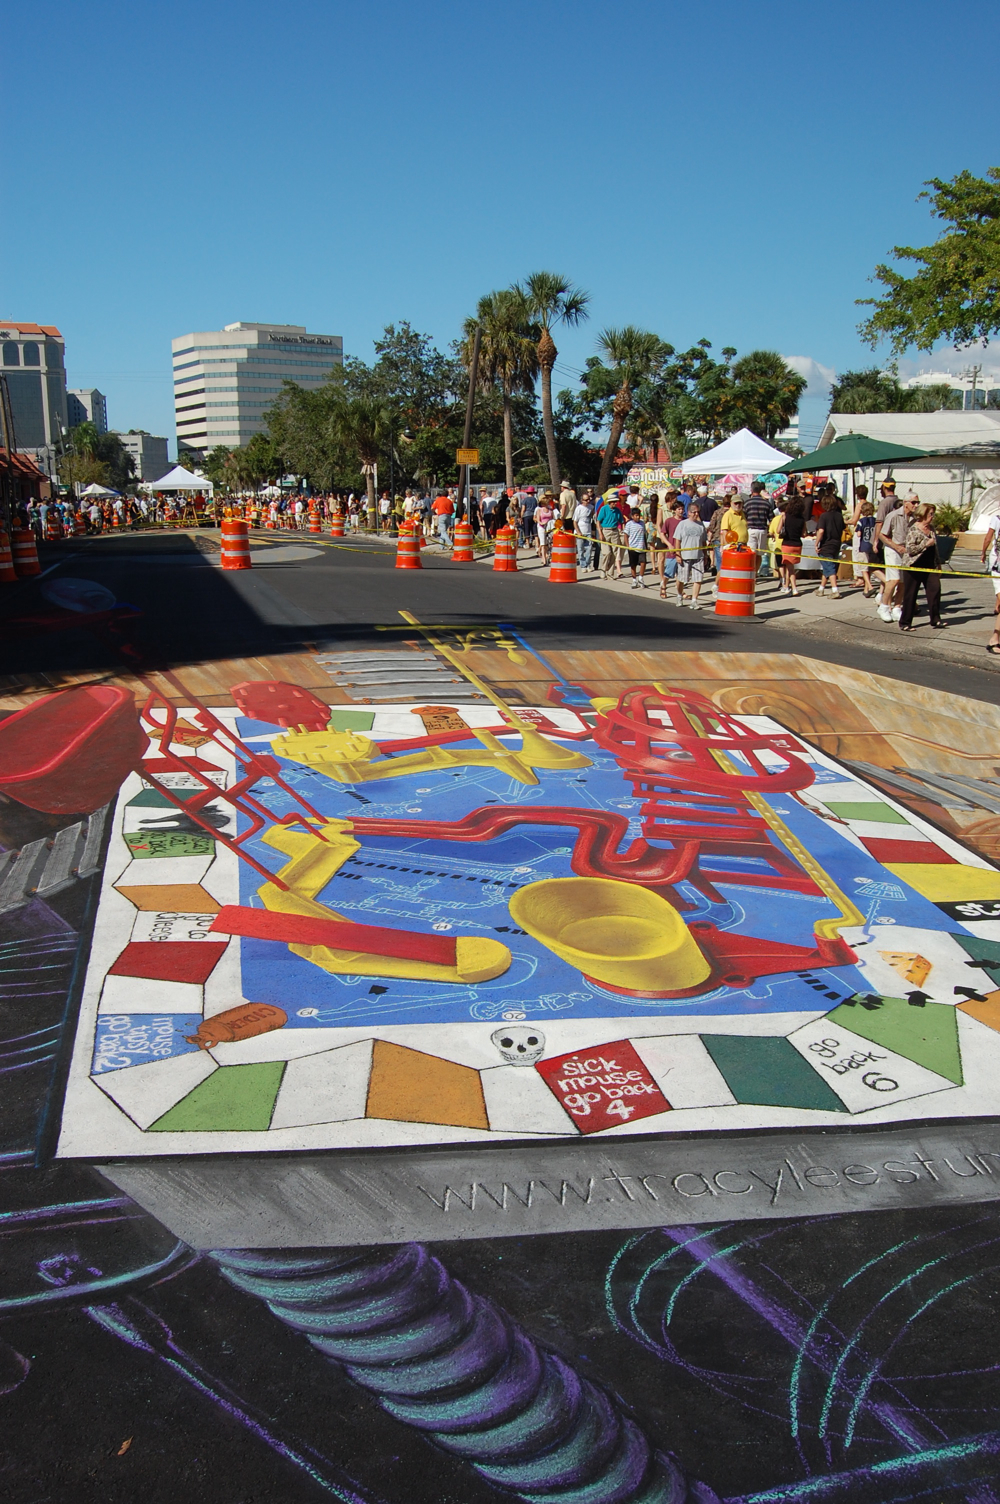 Chalk Festival check it out, there is still time (parking, donations